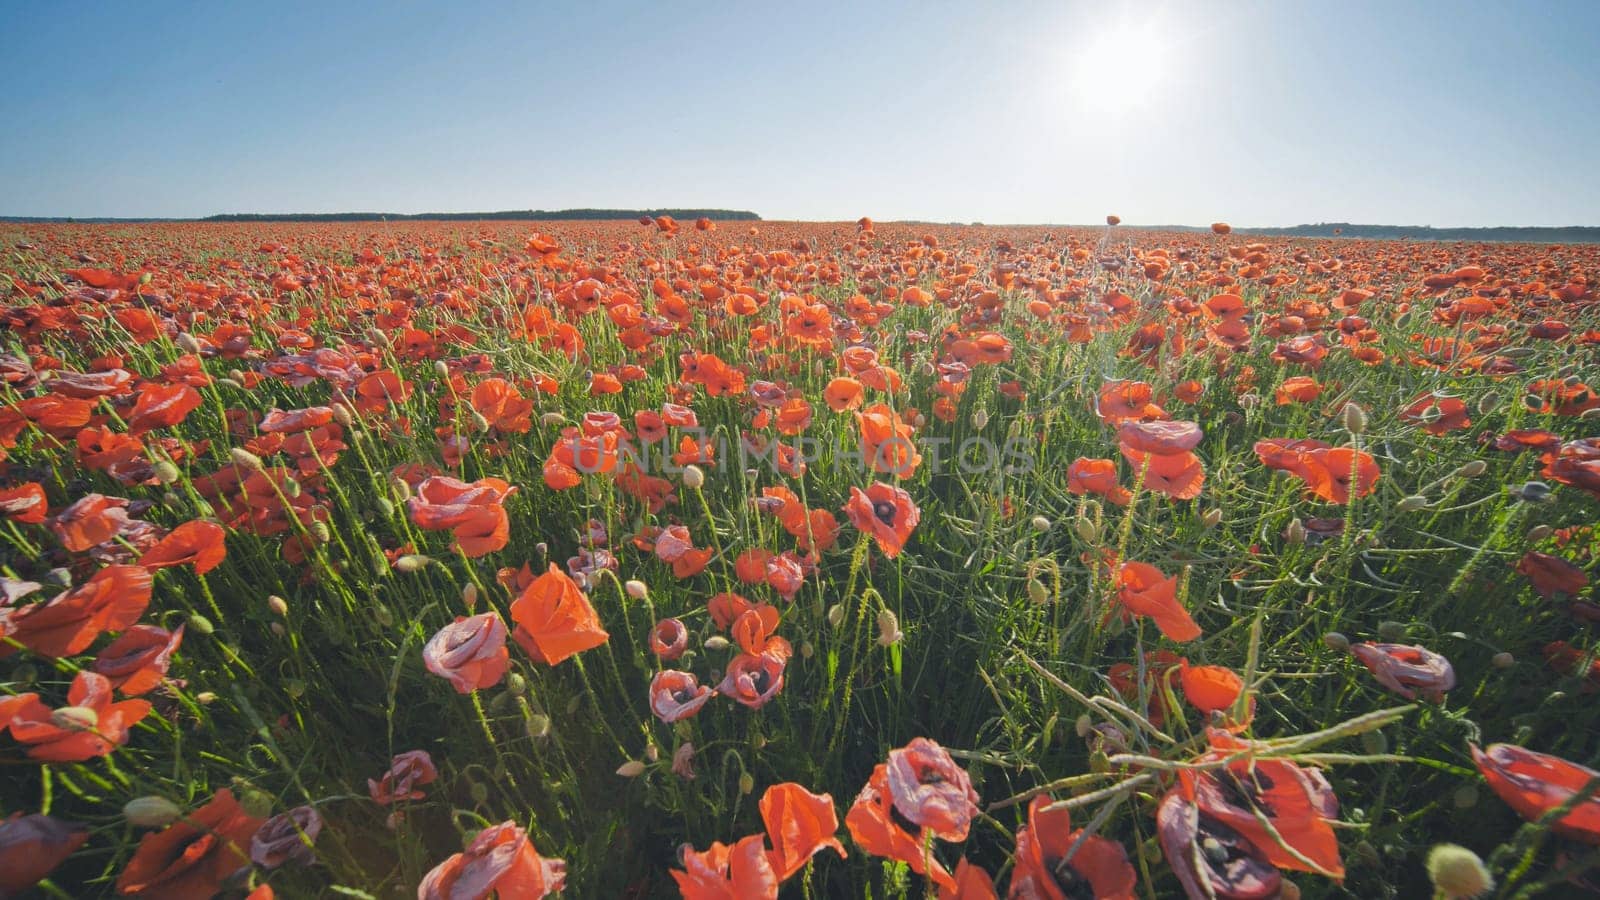 A large field of red poppy flowers at sunset. by DovidPro